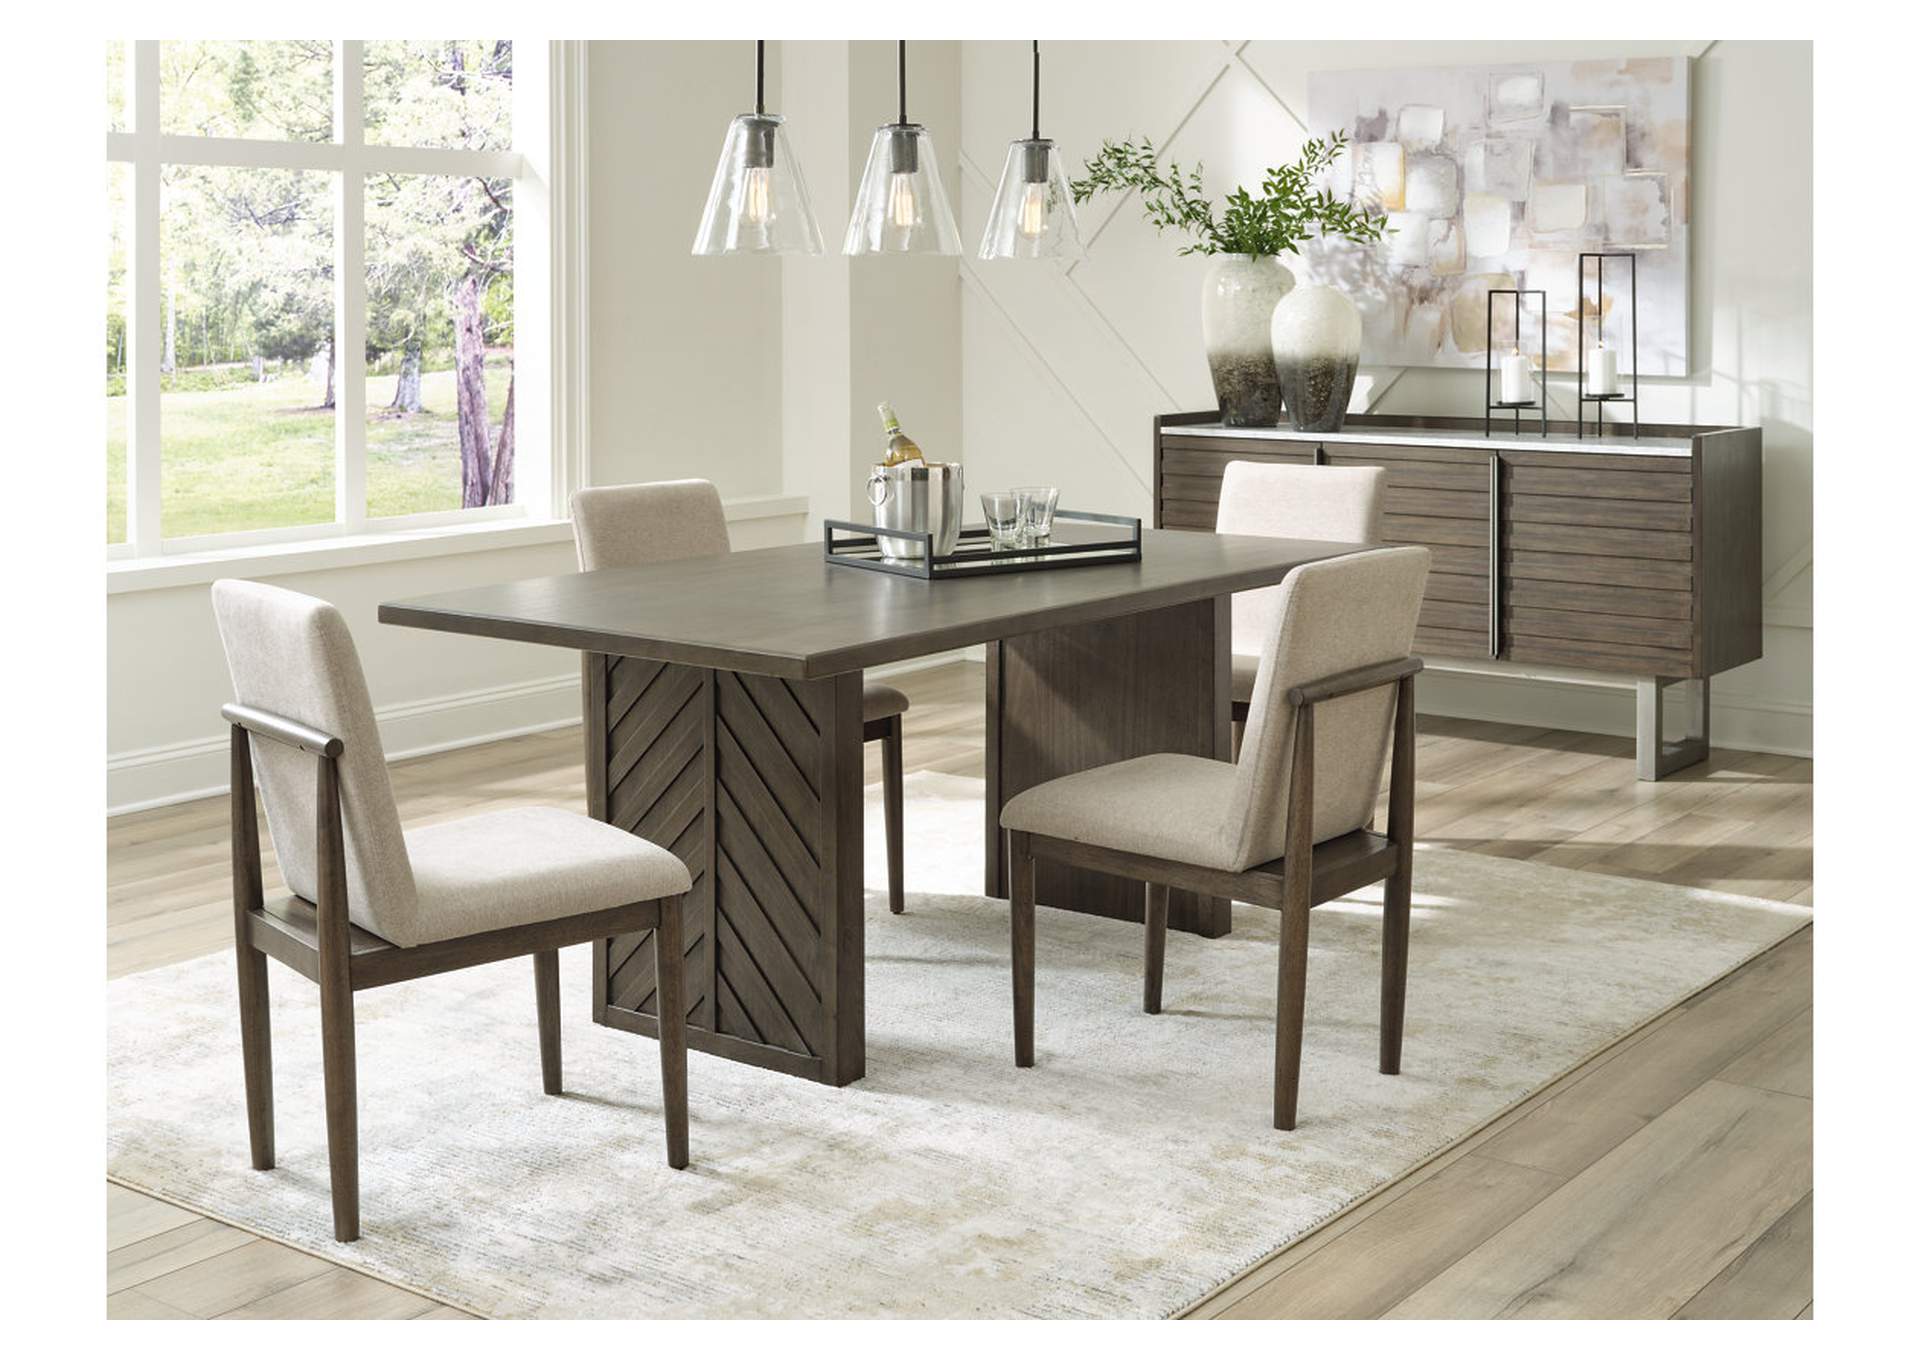 Arkenton Dining Table and 4 Chairs,Ashley